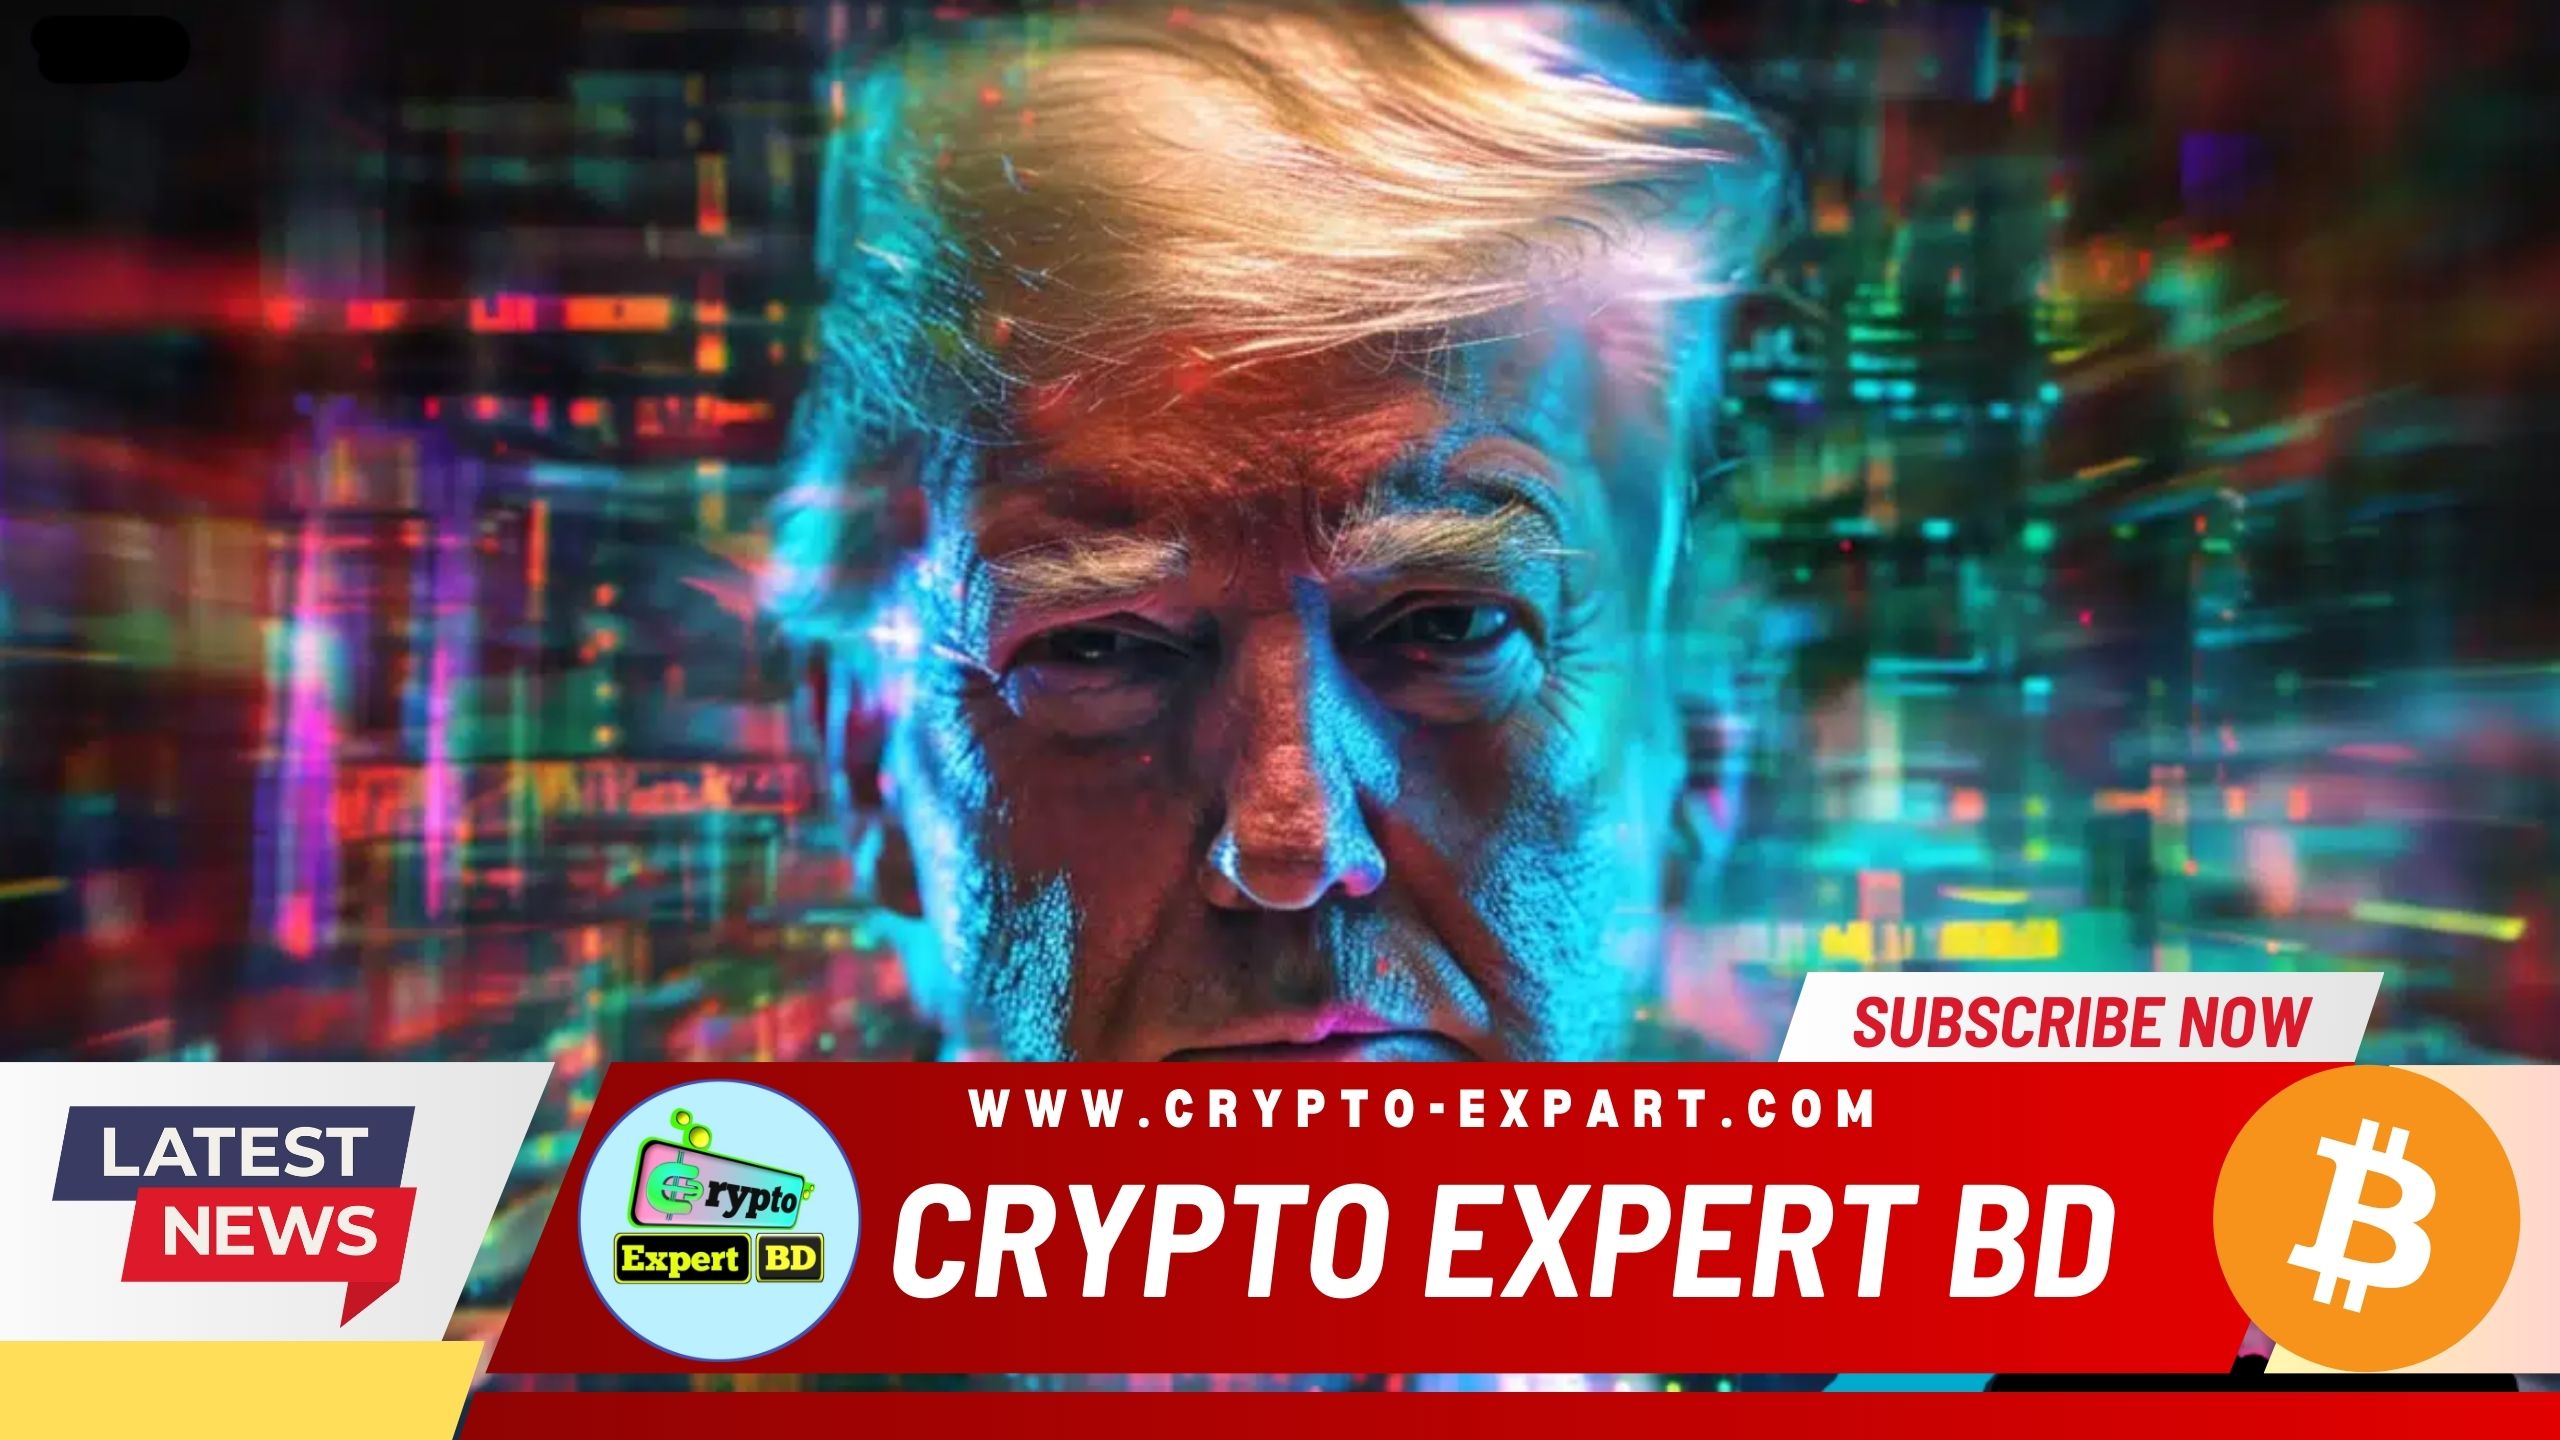 Trump Collaborates with Bitcoin Magazine CEO on ‘Day 1’ Crypto Policy